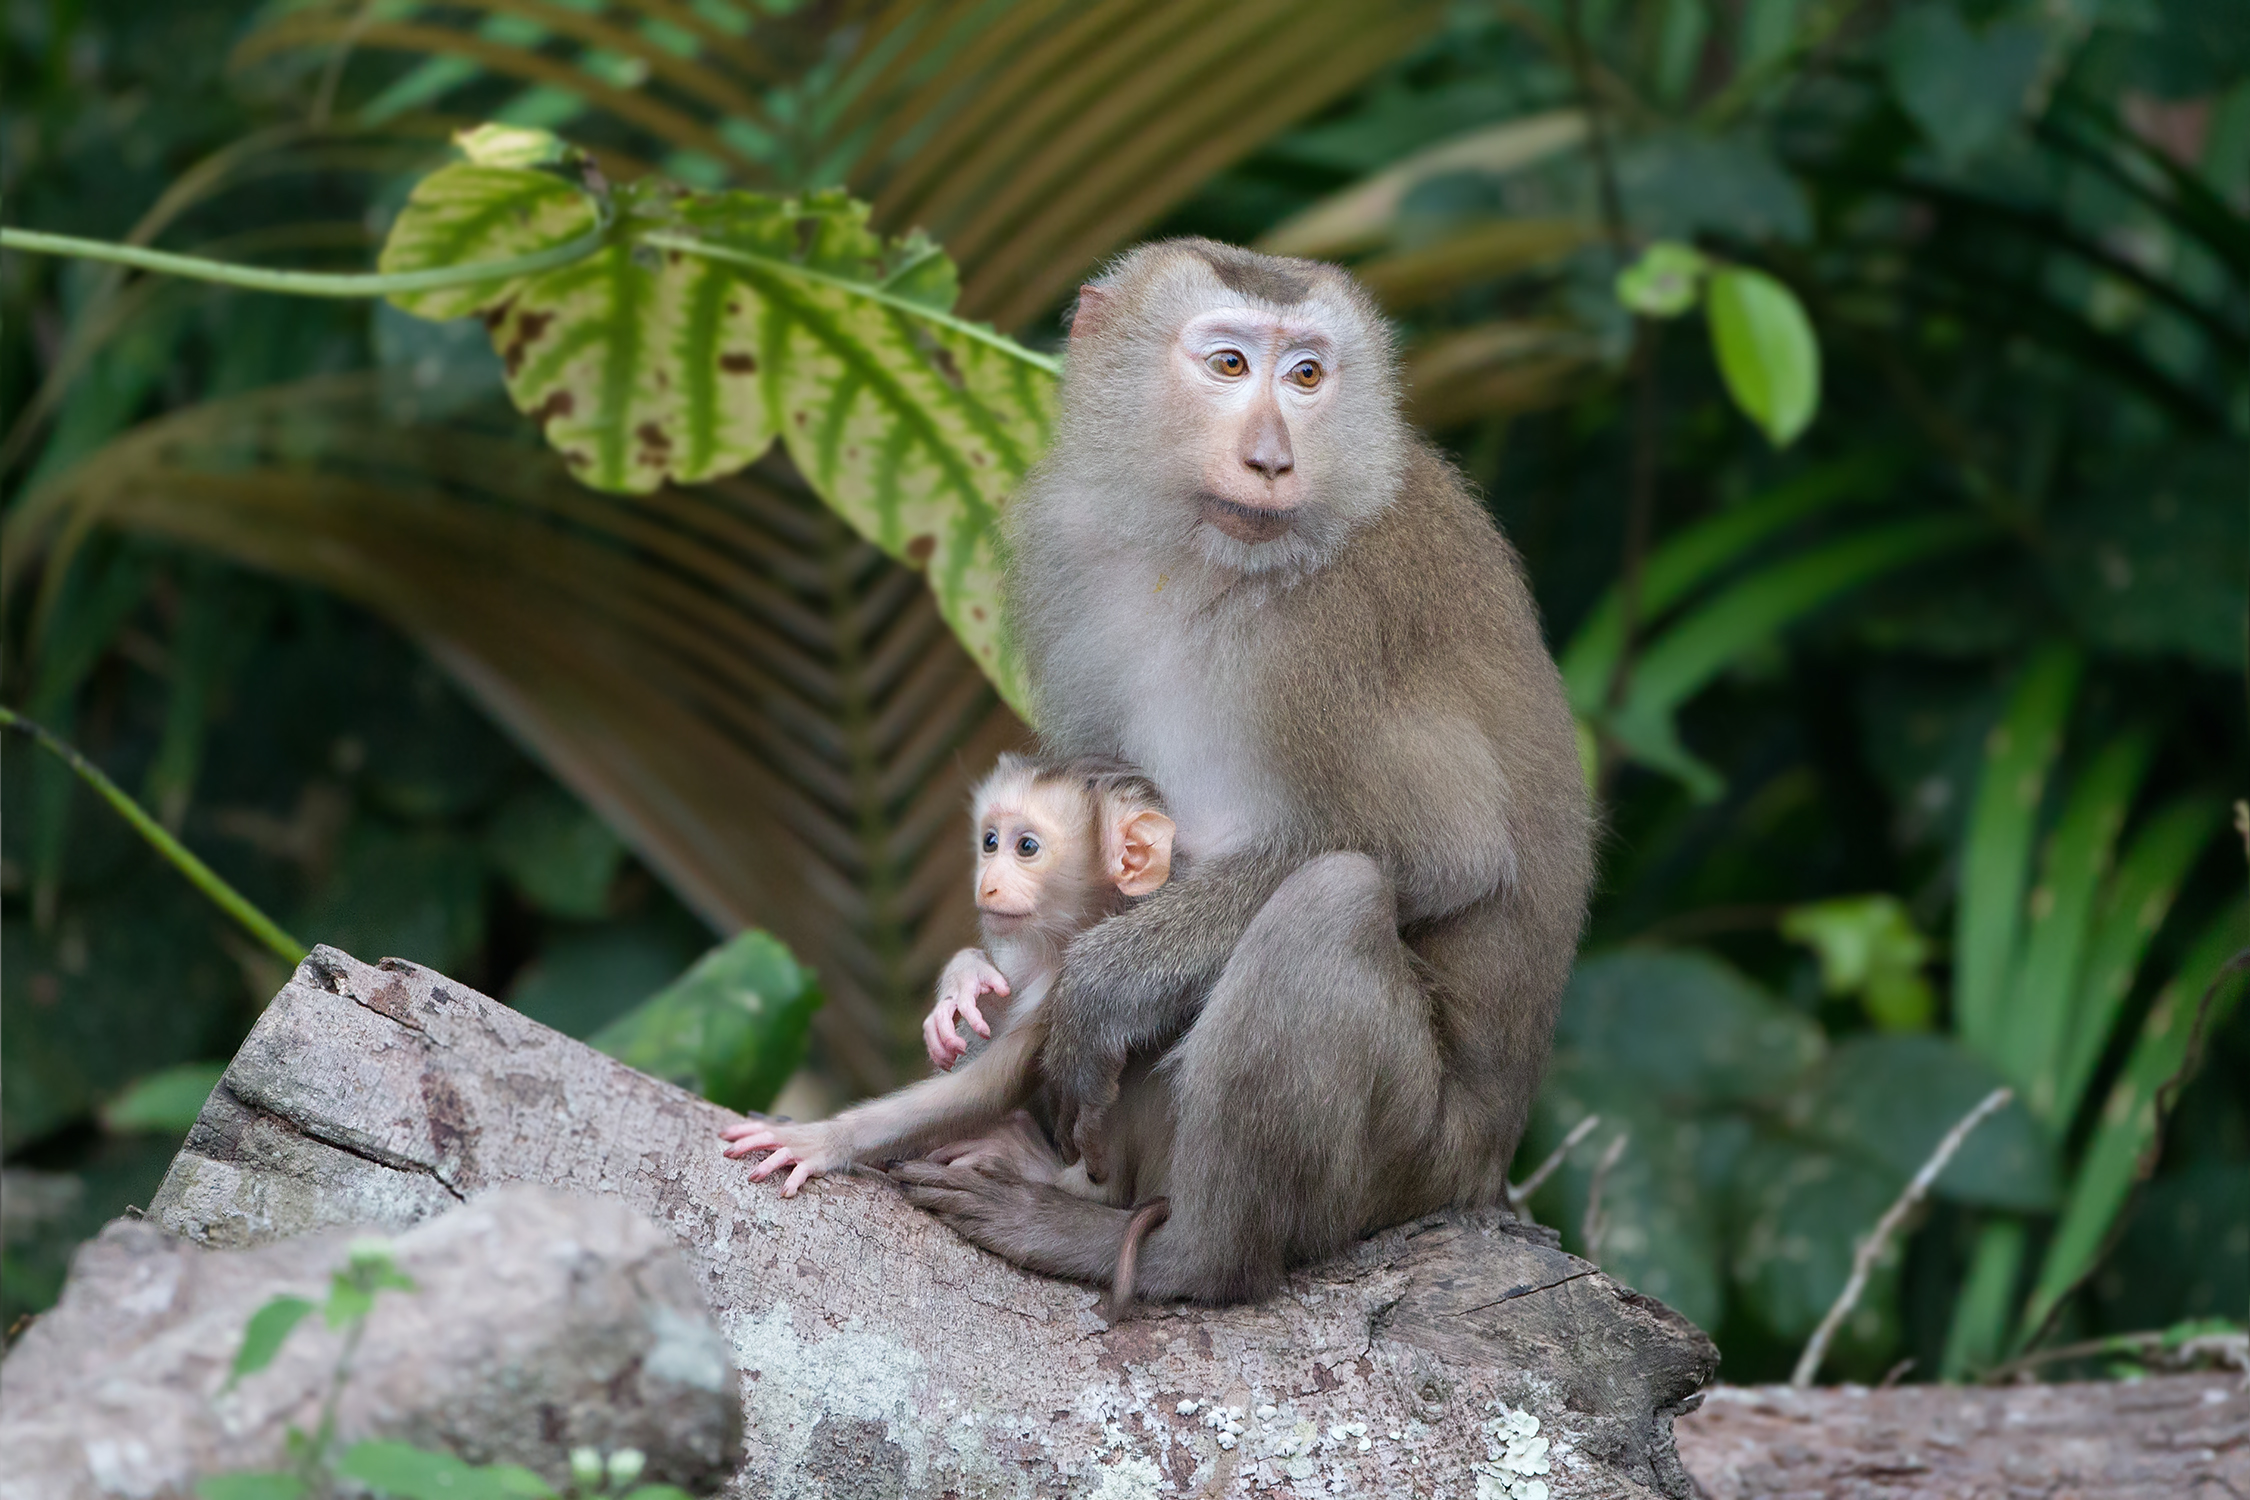 Northern pig-tailed macaque - Wikipedia